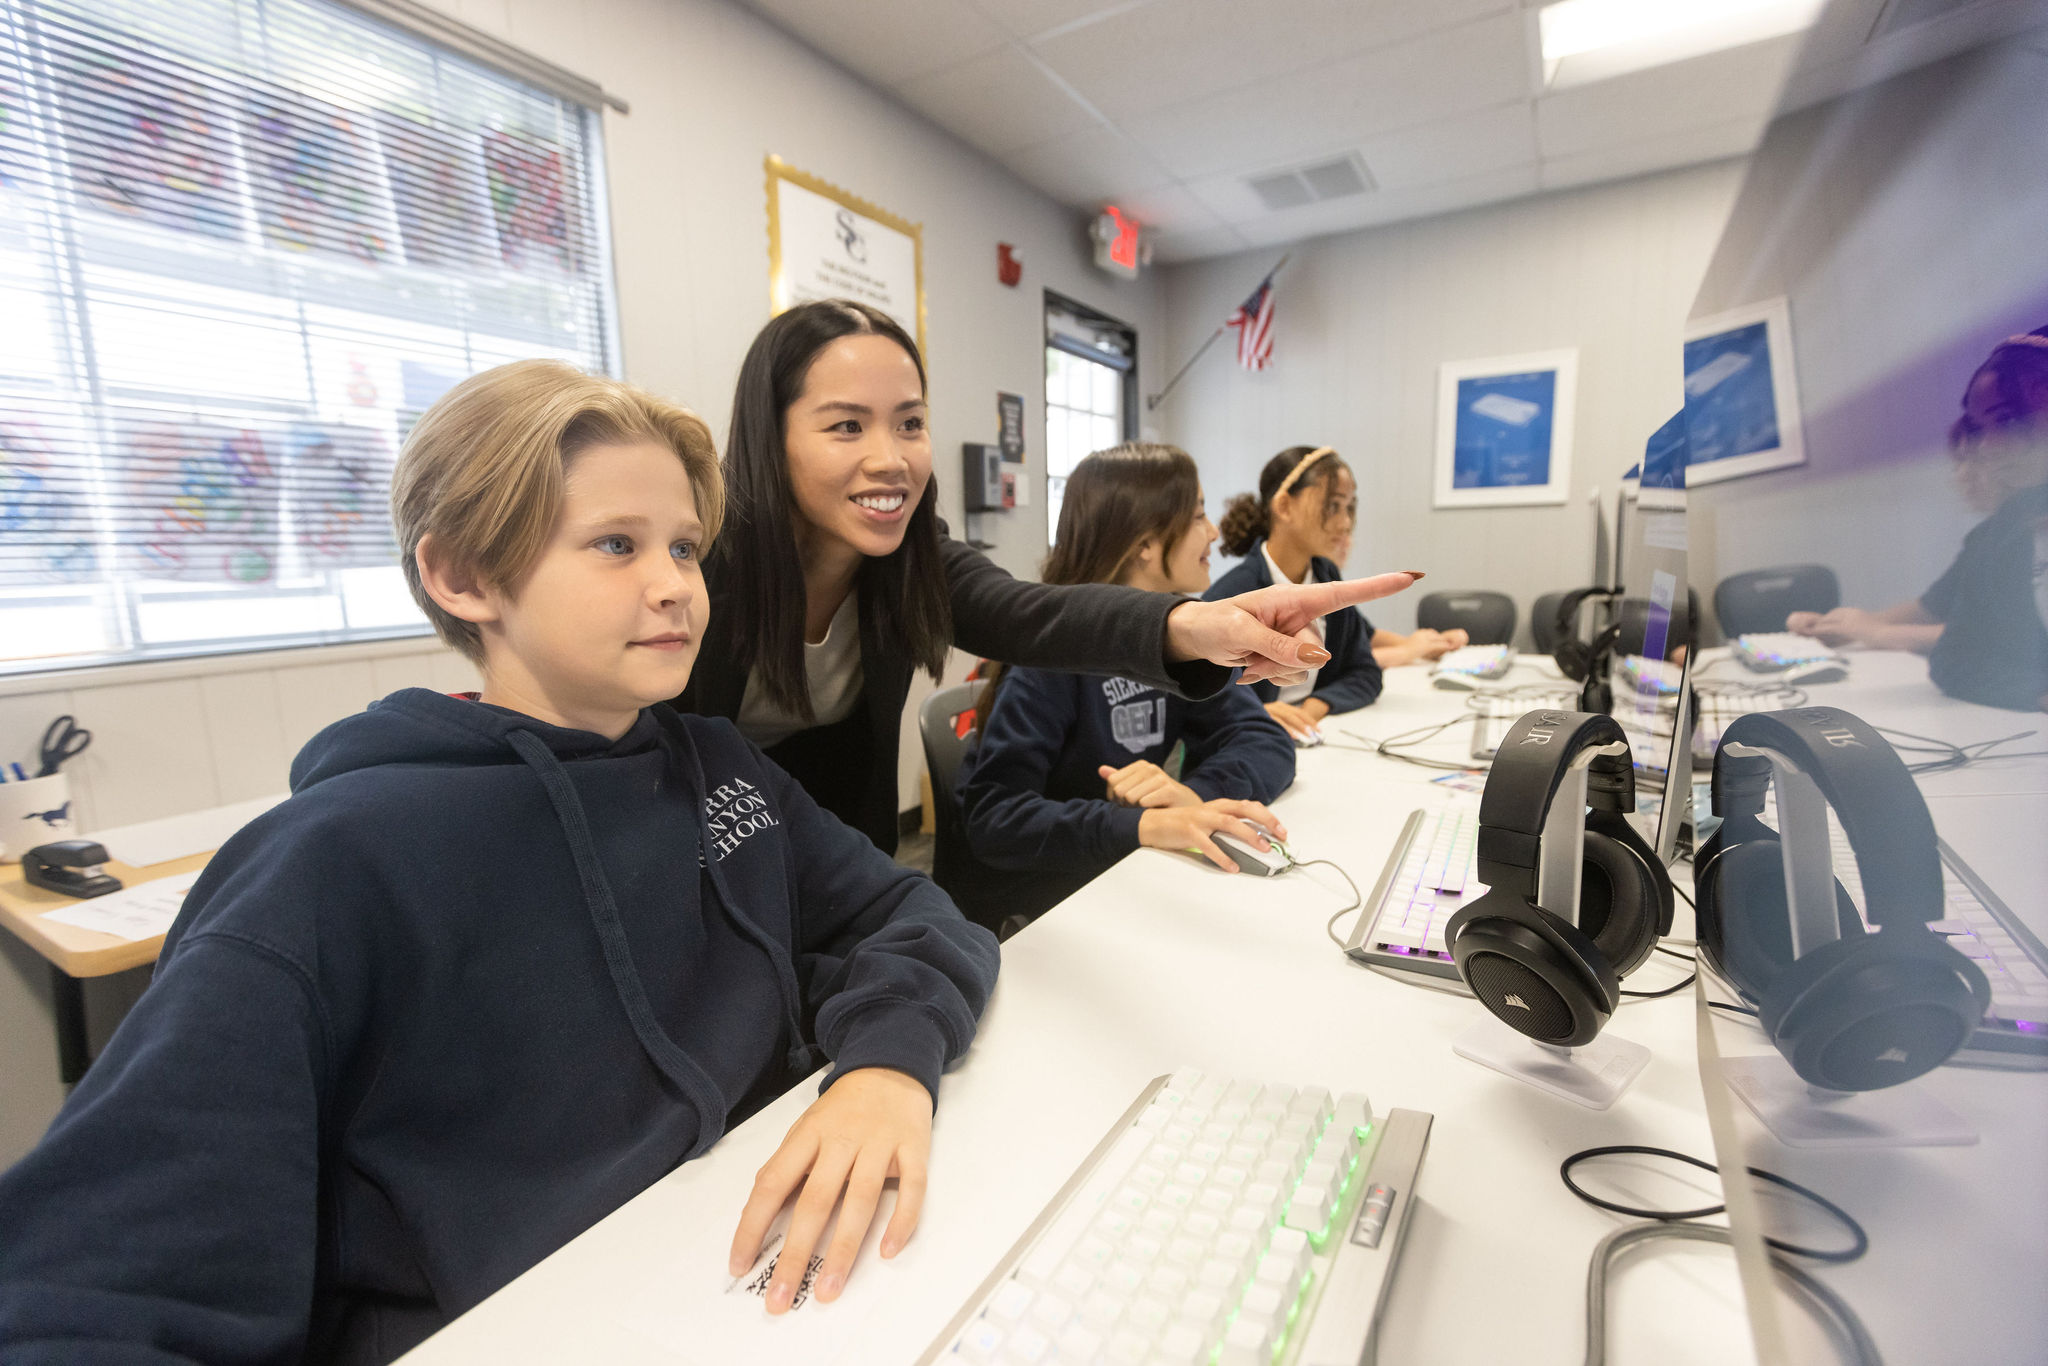 A lower school teacher and two students from Sierra Canyon are focused on their computers in a classroom.